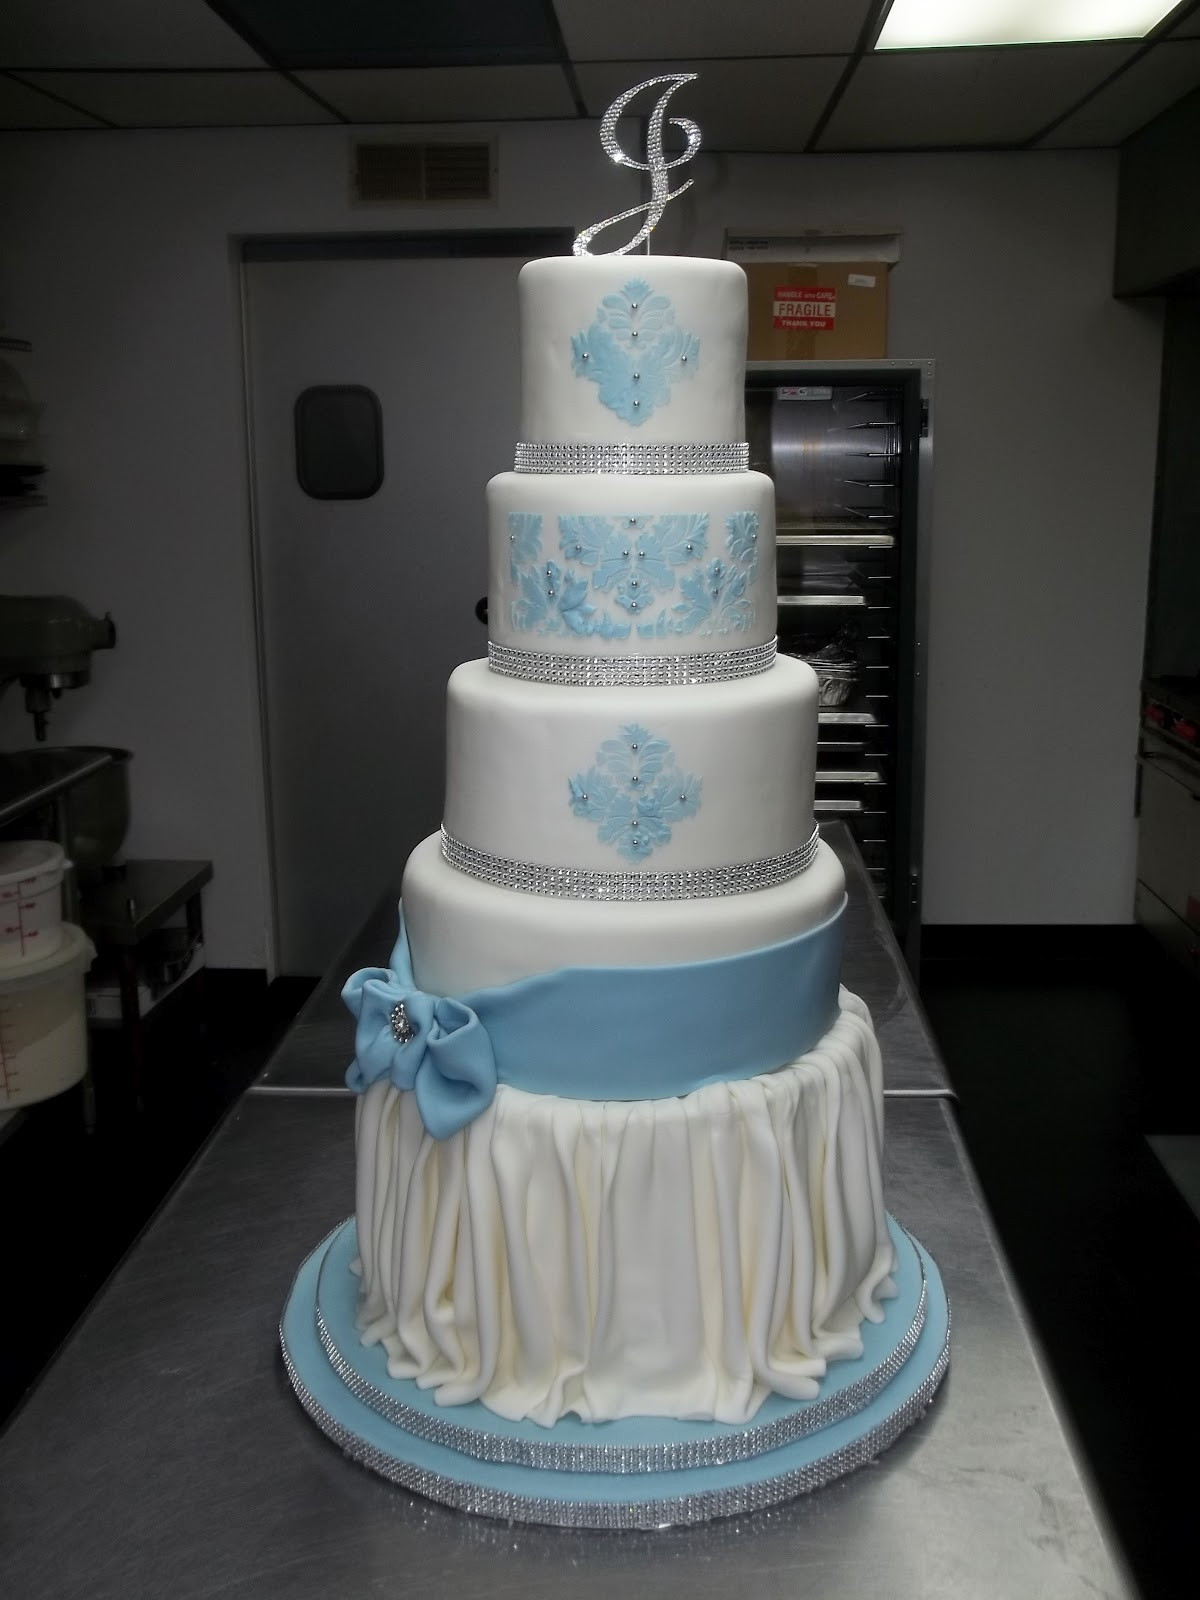 Wedding Cakes In St Louis
 The Sin City Mad Baker Nicole s Wedding Cake in St Louis